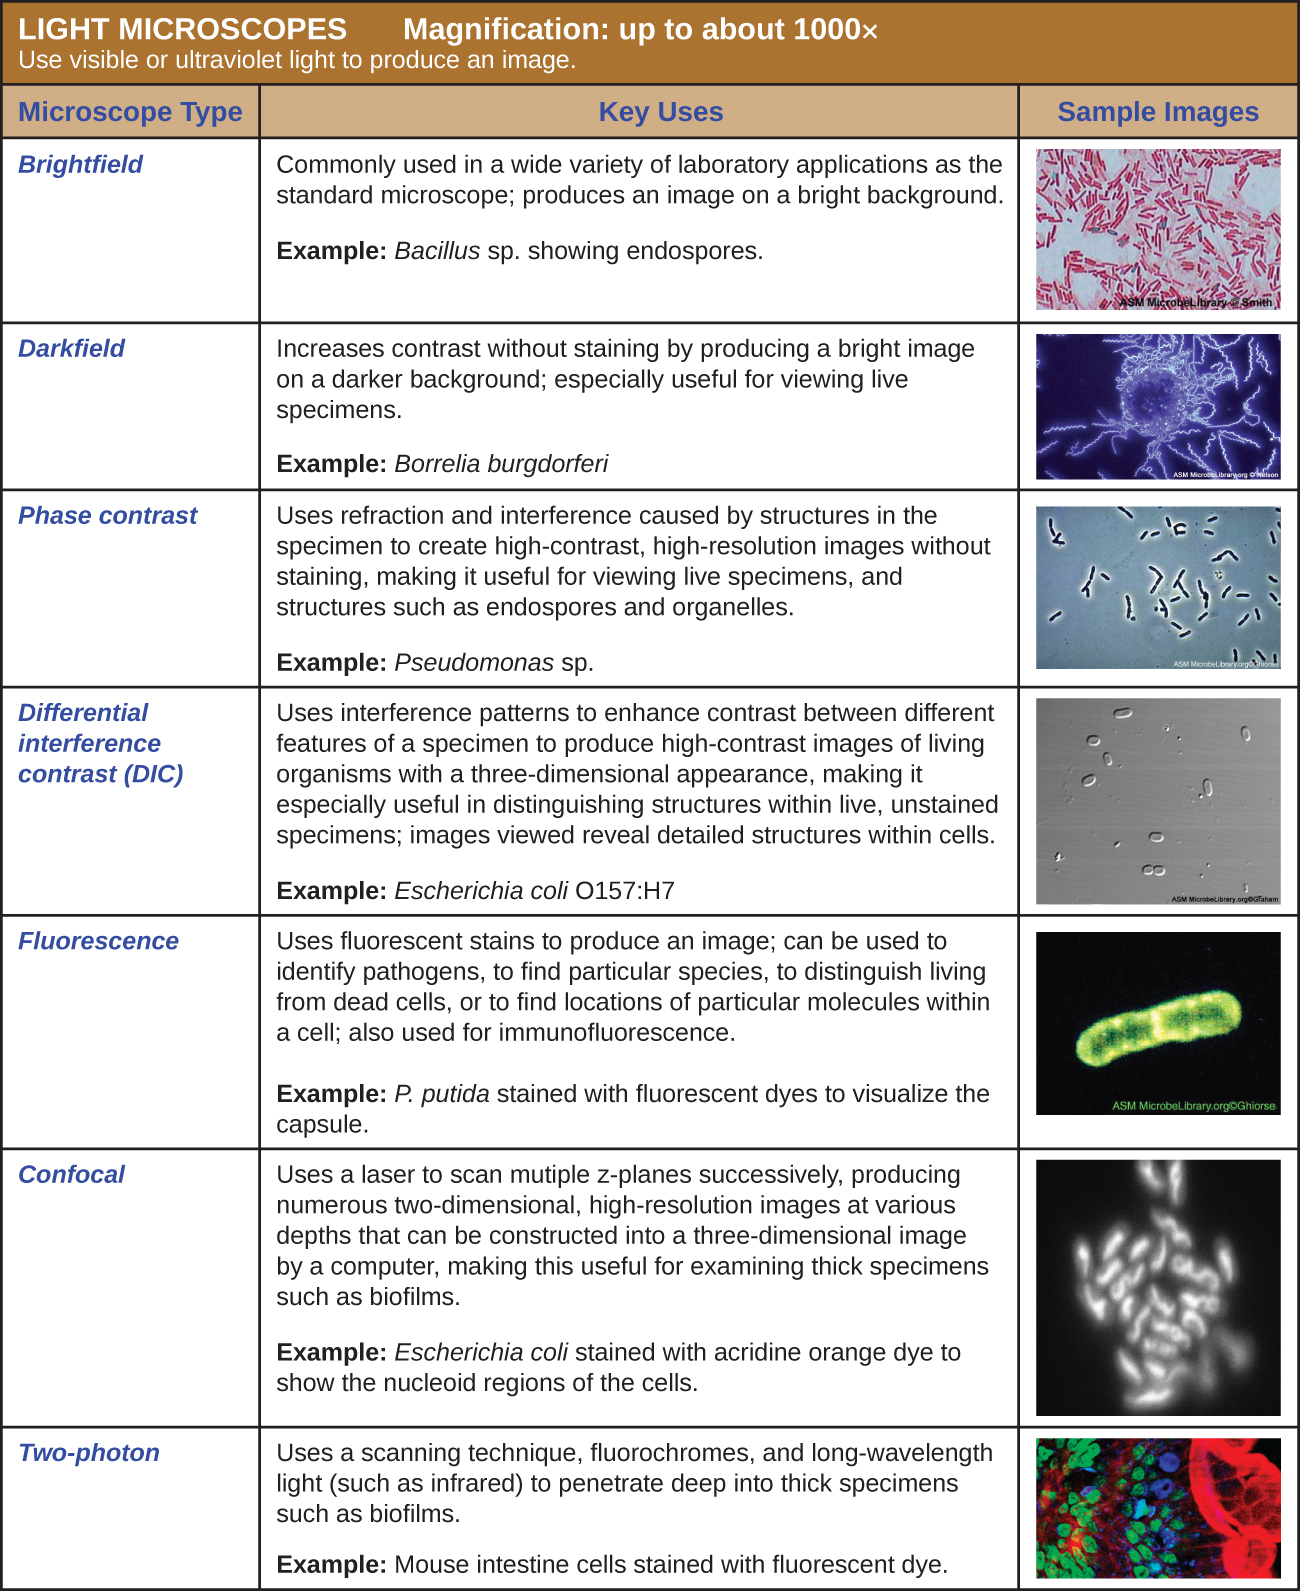 A table of light microscope types. These use visible or ultraviolet light to produce an image. Magnification: up to about 1000x. Brightfield microscopes are commonly used in a wide variety of laboratory applications as the standard microscope and produce an image on a bright background. The sample image of Bacillus sp. shows red rods on a clear background; small green dots in the red cells indicate endospores. Darkfield microscopes increase contrast without staining by producing a bright image on a dark background. These are especially useful for viewing live specimens. The sample image (Borrelia burgdorferi) shows bright spirals on a dark background. Phase contrast microscopes use refraction and interference caused by structures in the specimen to create high-contrast, high-resolution images without staining, making it useful for viewing live specimens and structures such as endospores and organelles. The sample image (Pseudomonas sp.) shows dark rods with a bright halo. Differential interference contrast (DIC) uses interference patters to enhance contrast between different features of a specimen to produce high-contrast images of living organisms with a three-dimensional appearance, making it especially useful in distinguishing structures within live, unstained specimens. Images viewed reveal detailed structures within cells. The sample image (Escherichia coli 0157:H7) shows small three-dimensional ovals. Fluorescence uses fluorescent stains to produce an image. Fluorescent microscopes can be used to identify pathogens, to find particular species, to distinguish living from dead, or to find location of particular molecules within a cell; also used for immunofluorescence. The sample image (Pseuodomonas putida stained with fluorescent dyes to visualize capsule) shows a green rod on a black background. Confocal microscopes use a laser to scan multiple z-planes successively, producing numerous two-dimensional, high-resolution images at various depths that can be constructed into a three-dimensional image by a computer, making this useful for examining thick specimens such as biofilms. The sample image (mouse intestine cells stained with fluorescent dye) shows cells of various colors on a dark background.